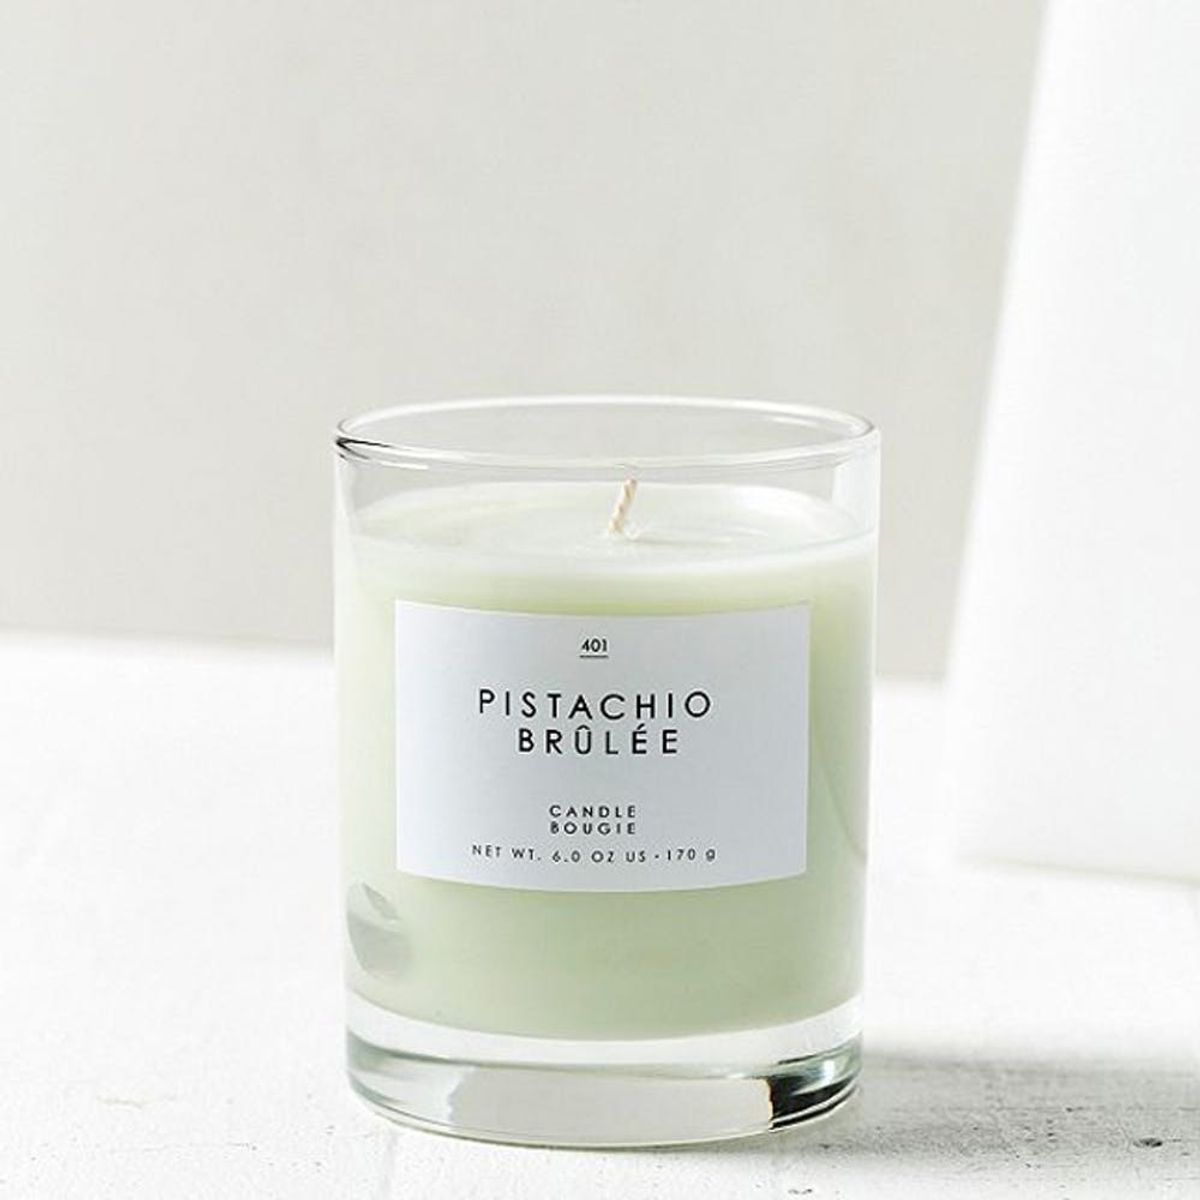 Bring Spring Scents into Your Home With These Candles